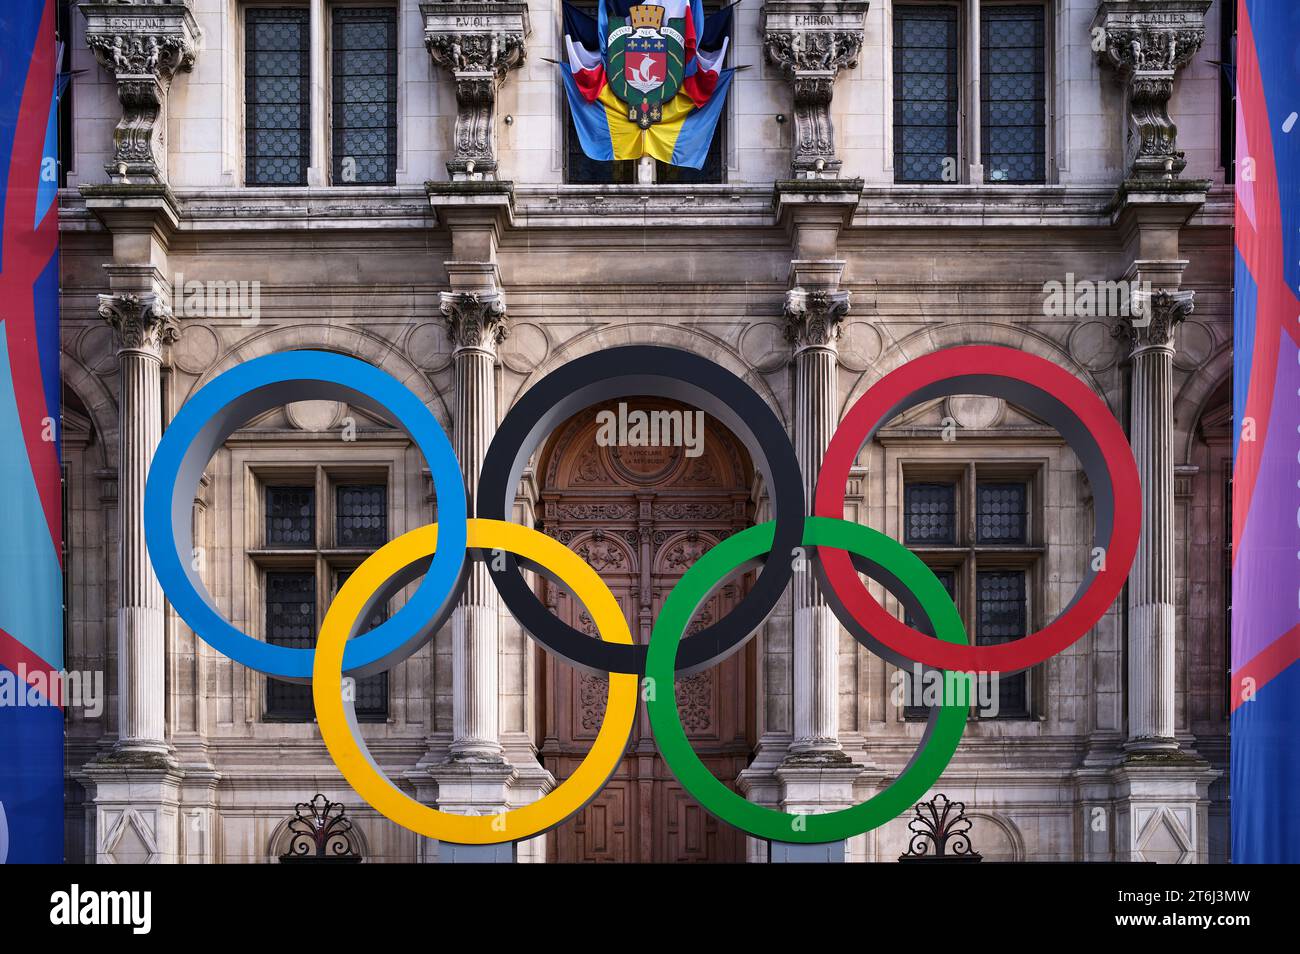 Logo, Rugb, World Cup, World Cup 2023, Olympic Rings, Olympic Games, Logo, on the occasion of the 2024 Olympics in Paris, City Hall, Hotel de Ville, Paris, France Stock Photo